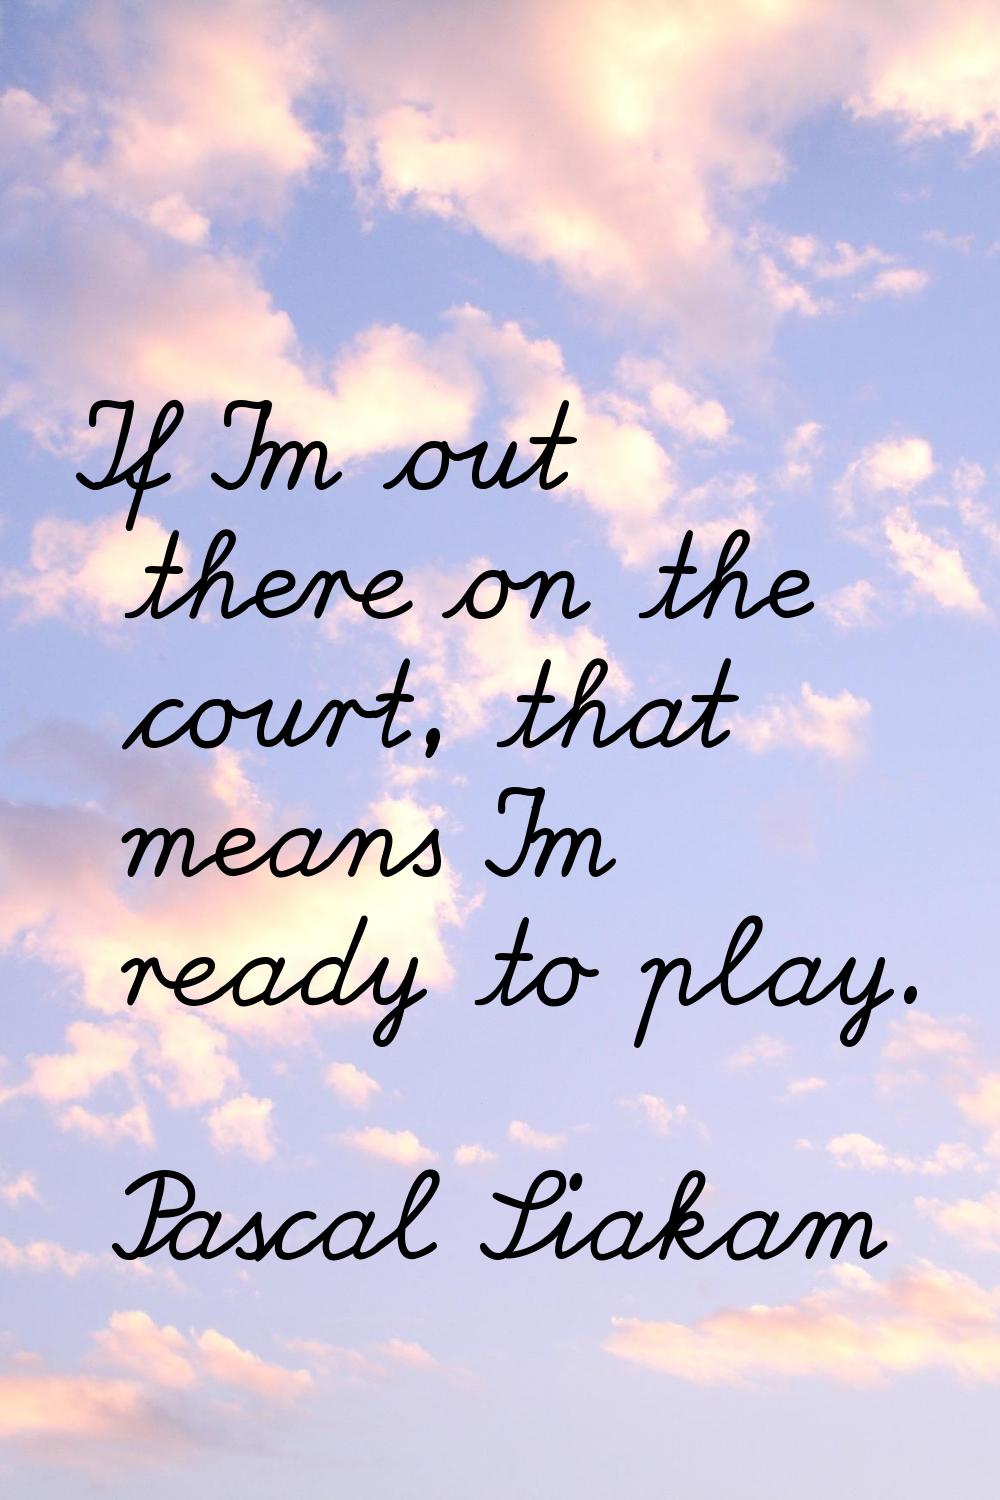 If I'm out there on the court, that means I'm ready to play.